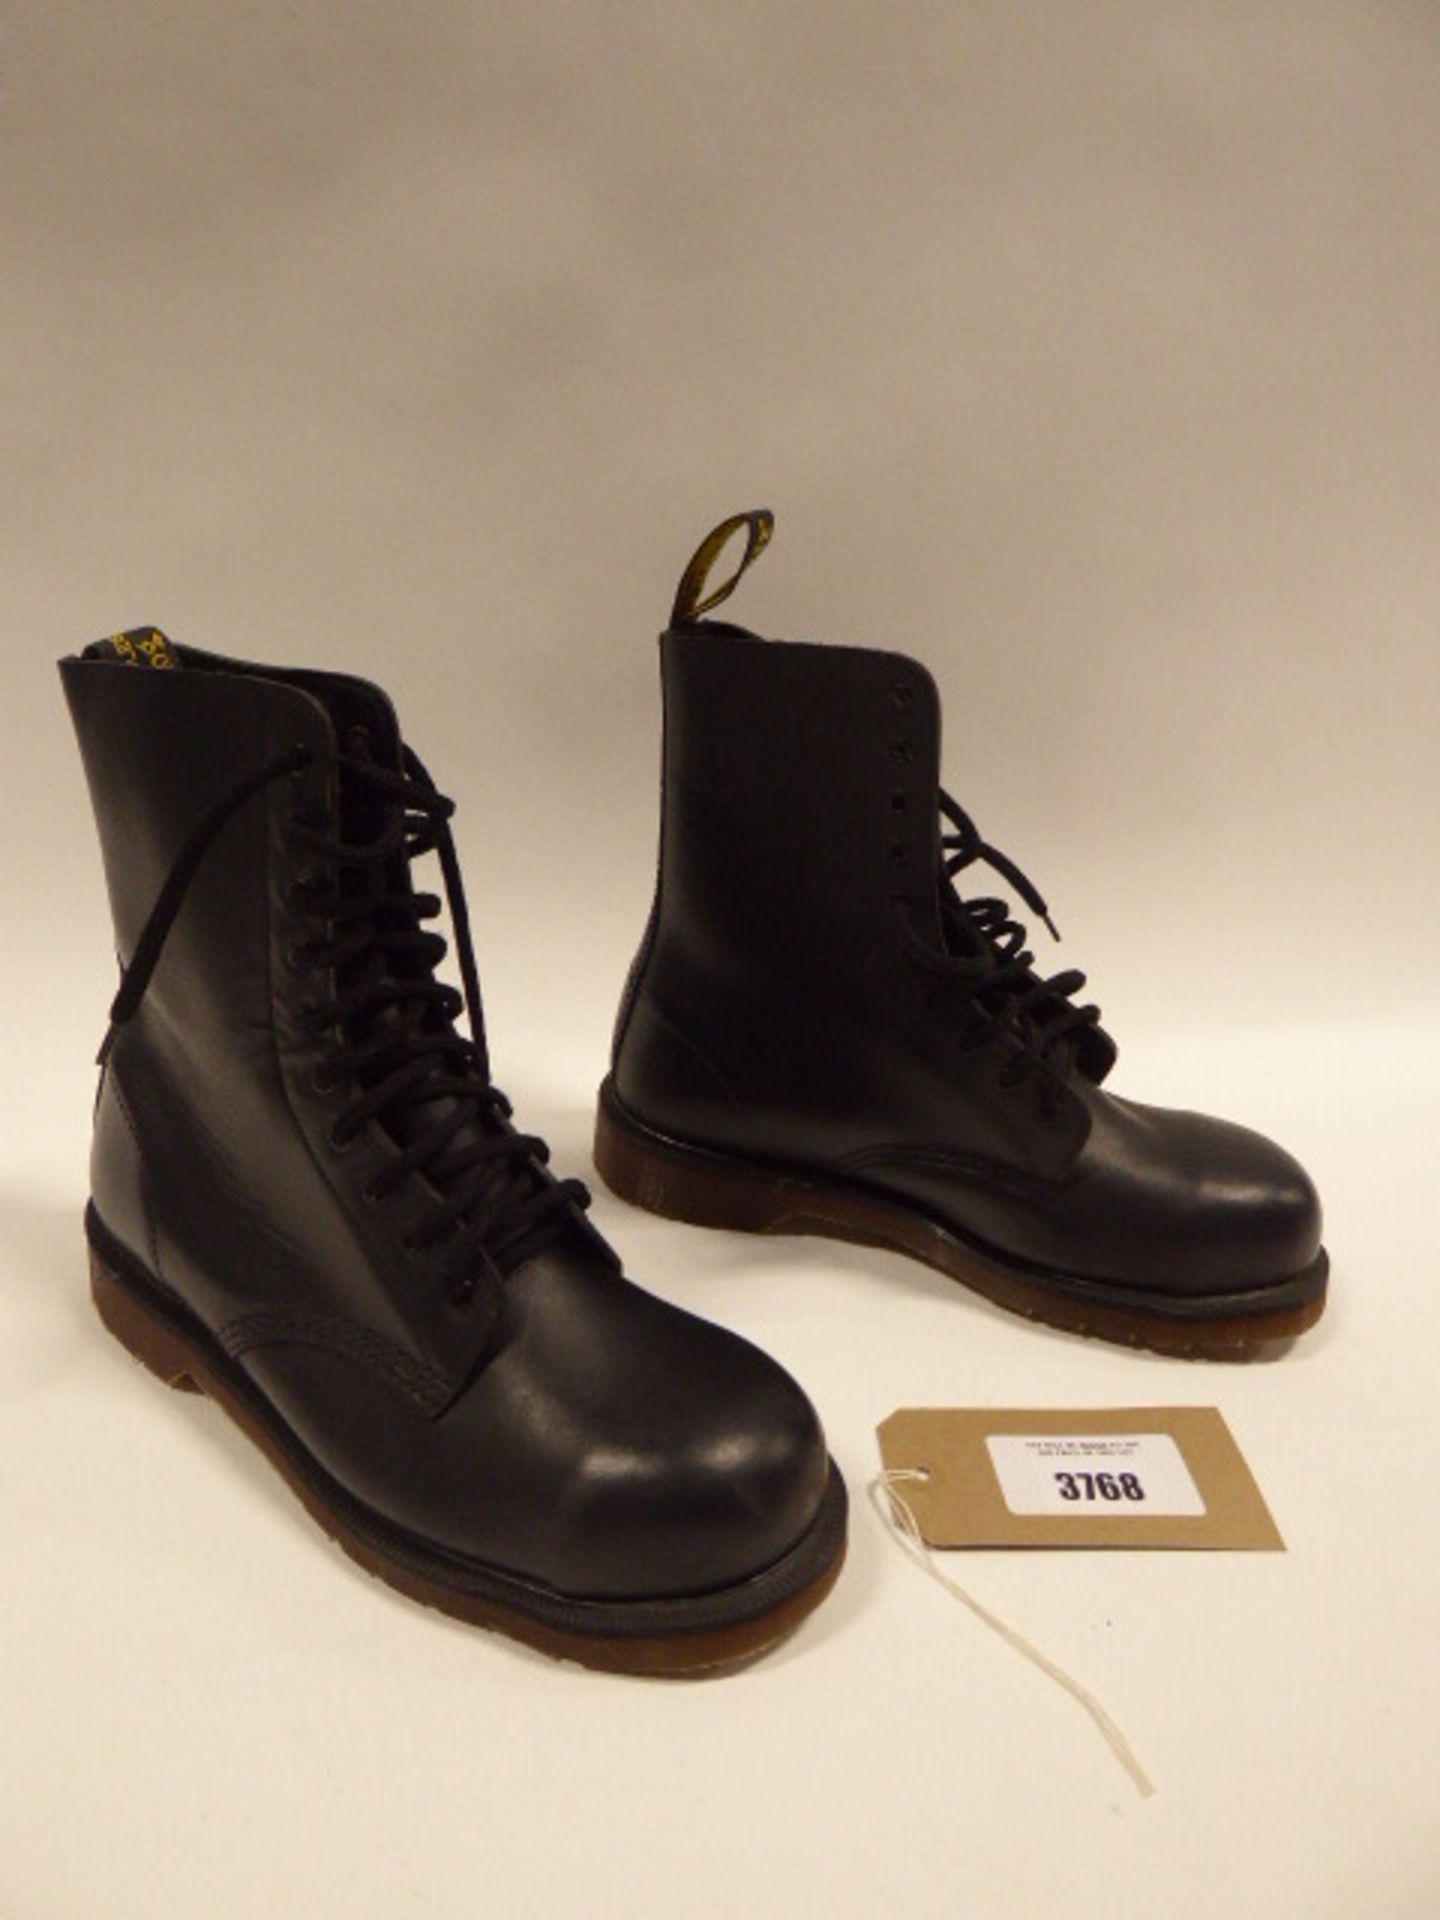 Dr Martens AirWair ankle boots size 8 (used) - Image 2 of 2